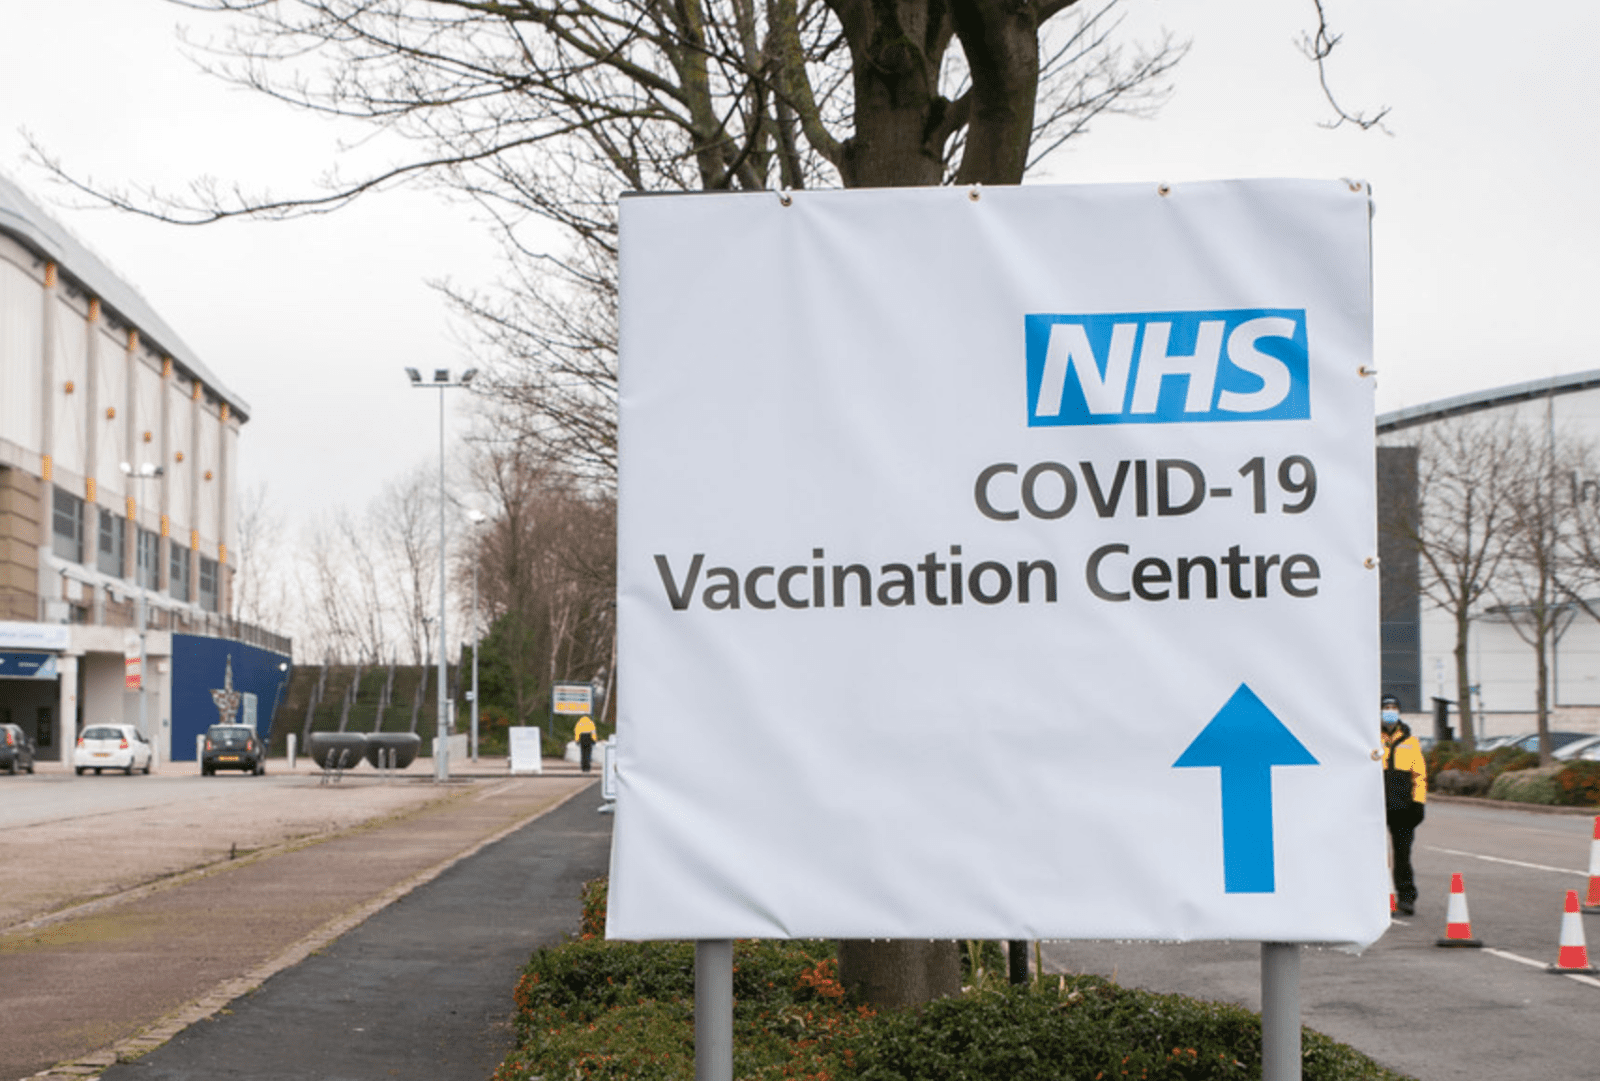 Government to look at ending mandatory COVID-19 vaccinations for NHS staff, The Manc